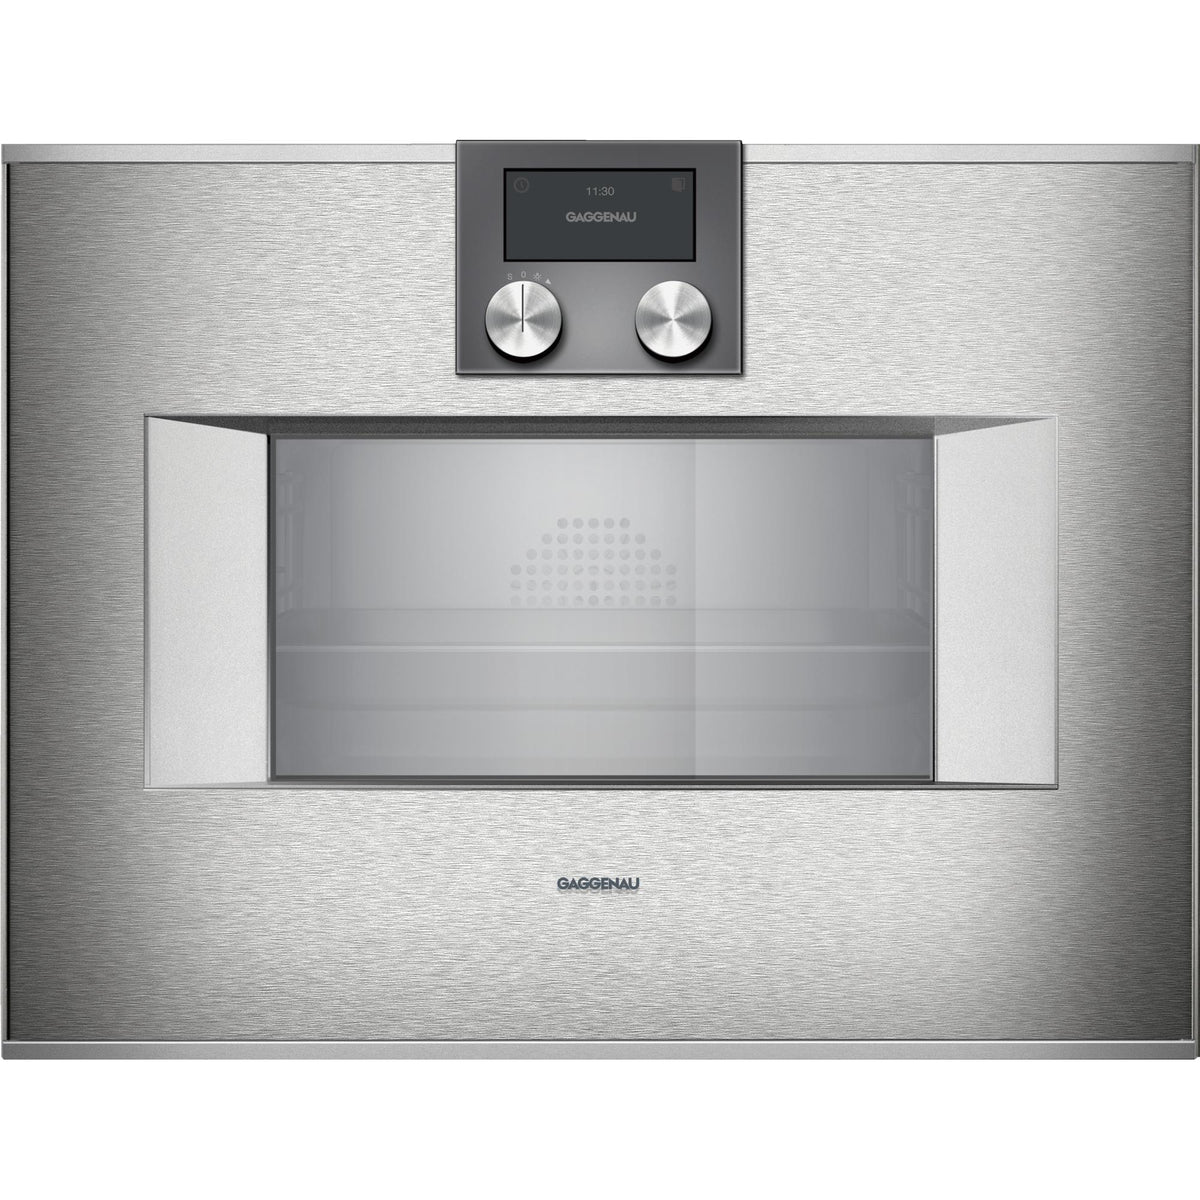 24-inch, 2.1 cu.ft. Built-in Single Wall Oven with Steam Cooking BS 470 612 IMAGE 1